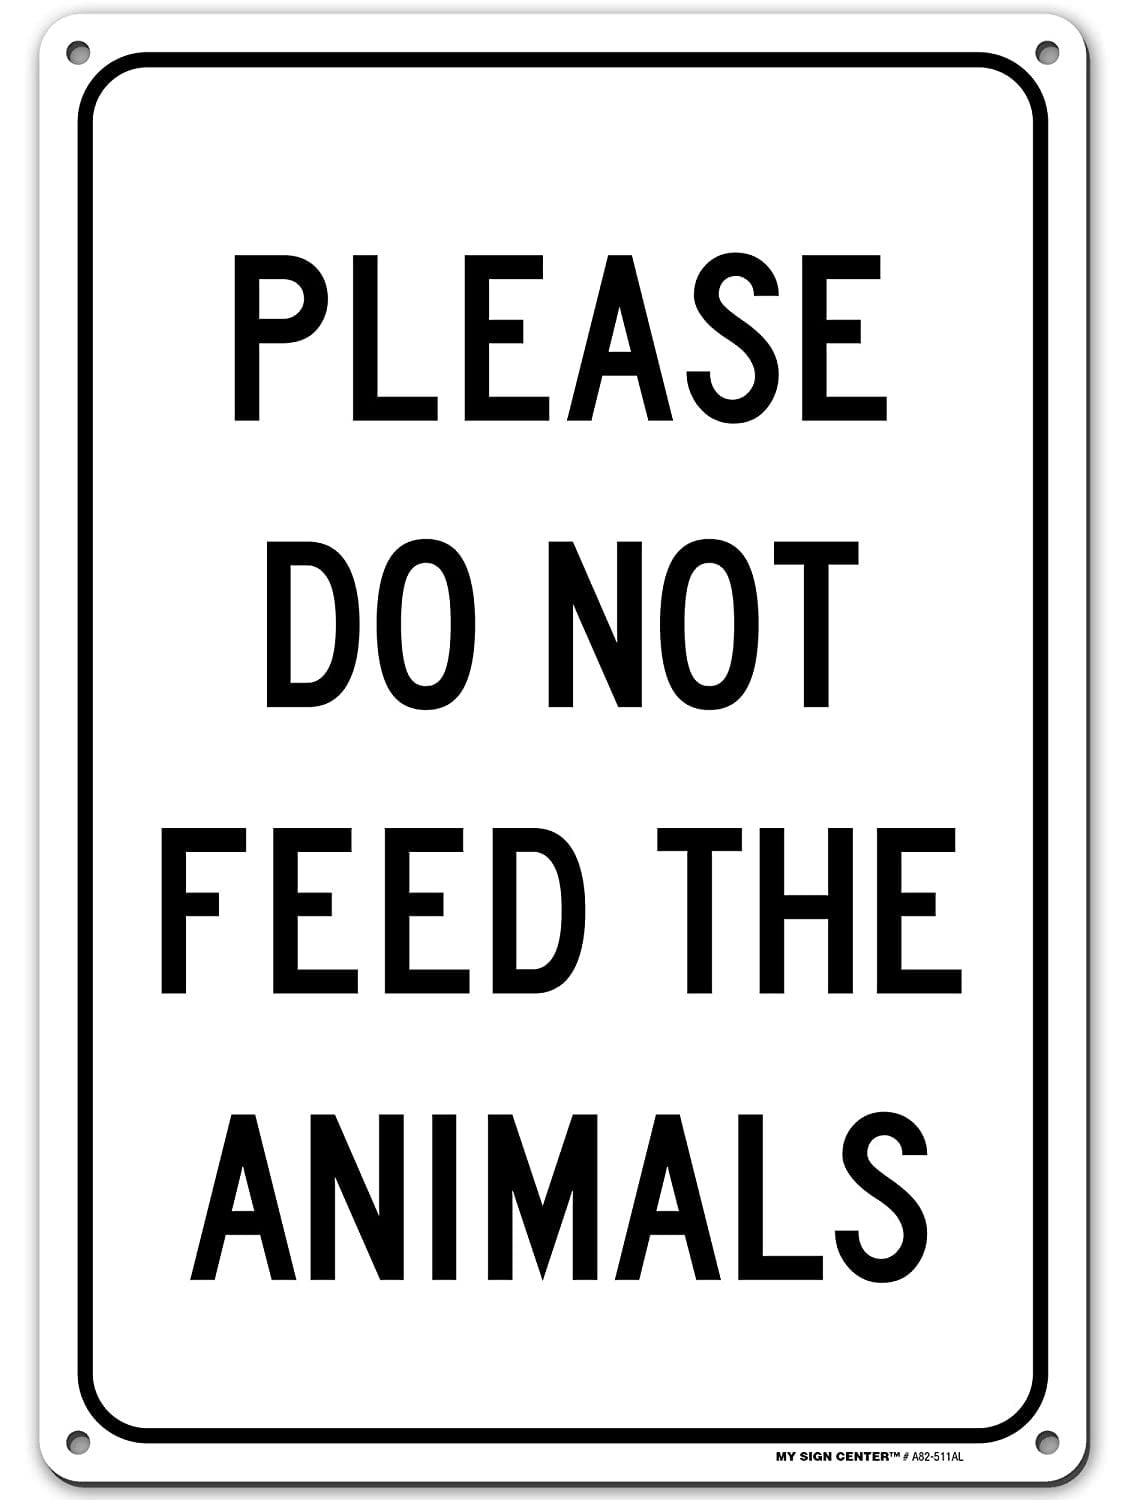 DO NOT FEED THE ANIMALS metal aluminum sign #B 